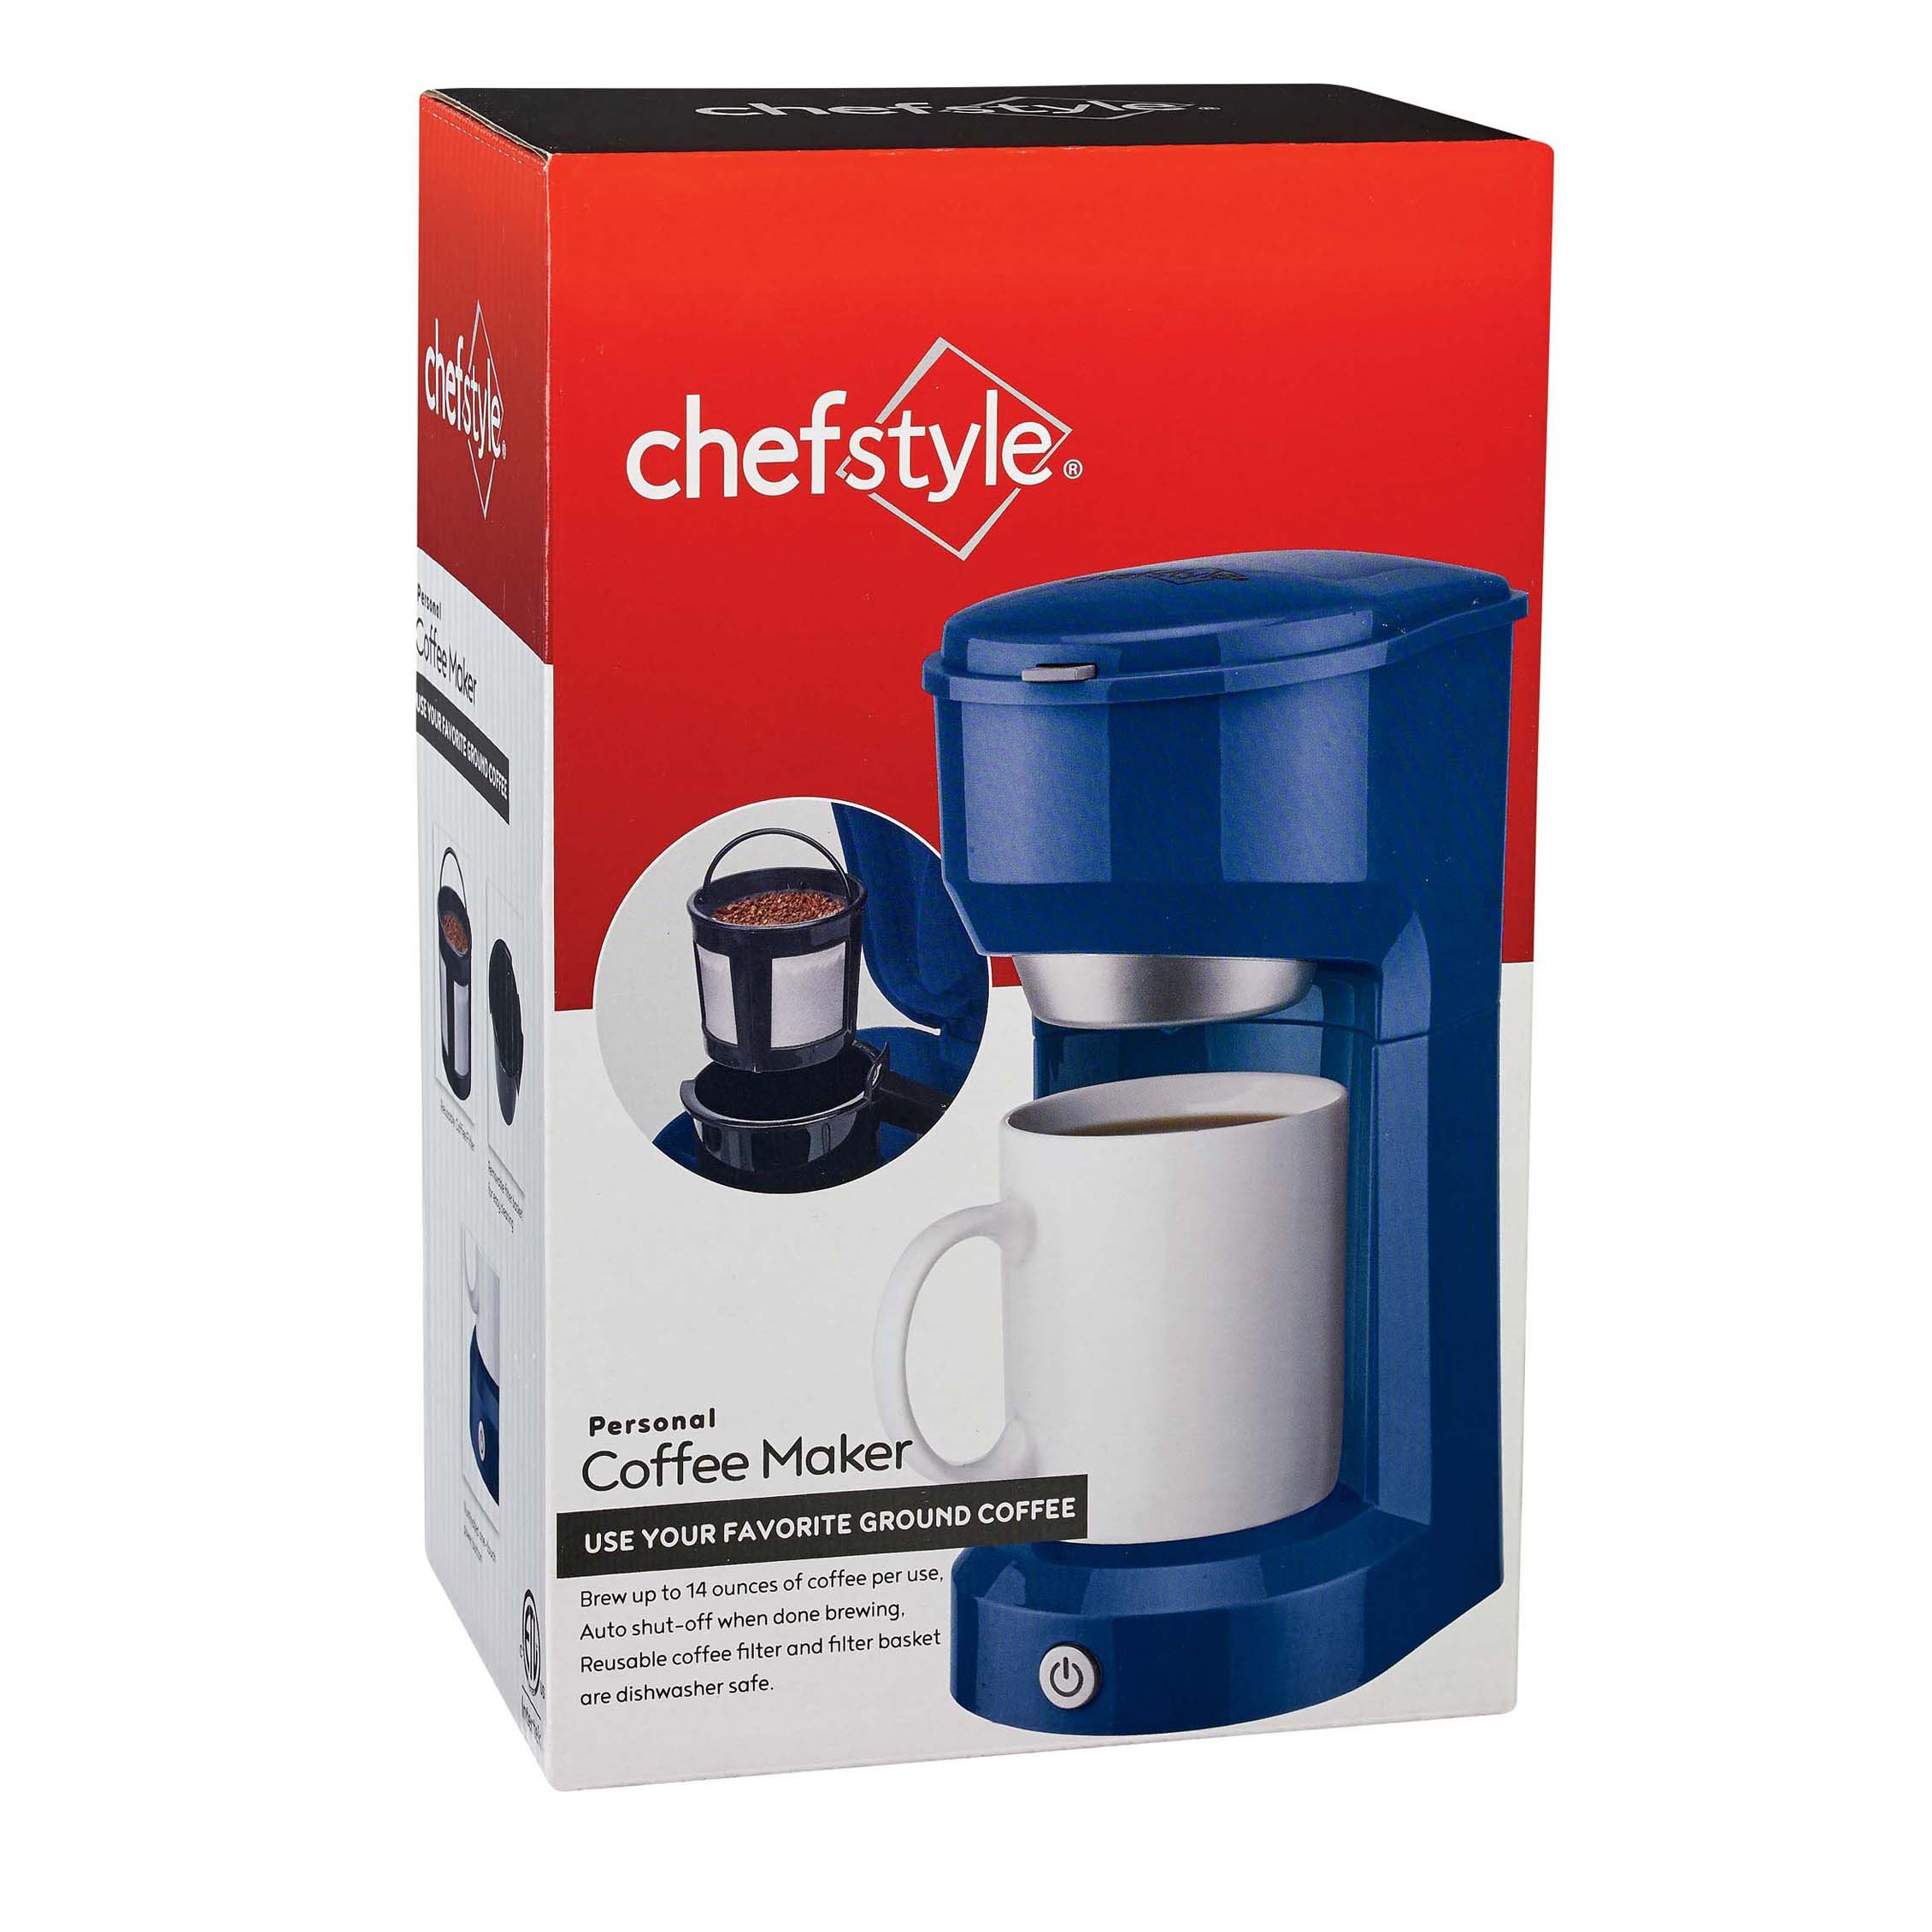 chefstyle Personal Coffee Maker - Black - Shop Coffee Makers at H-E-B